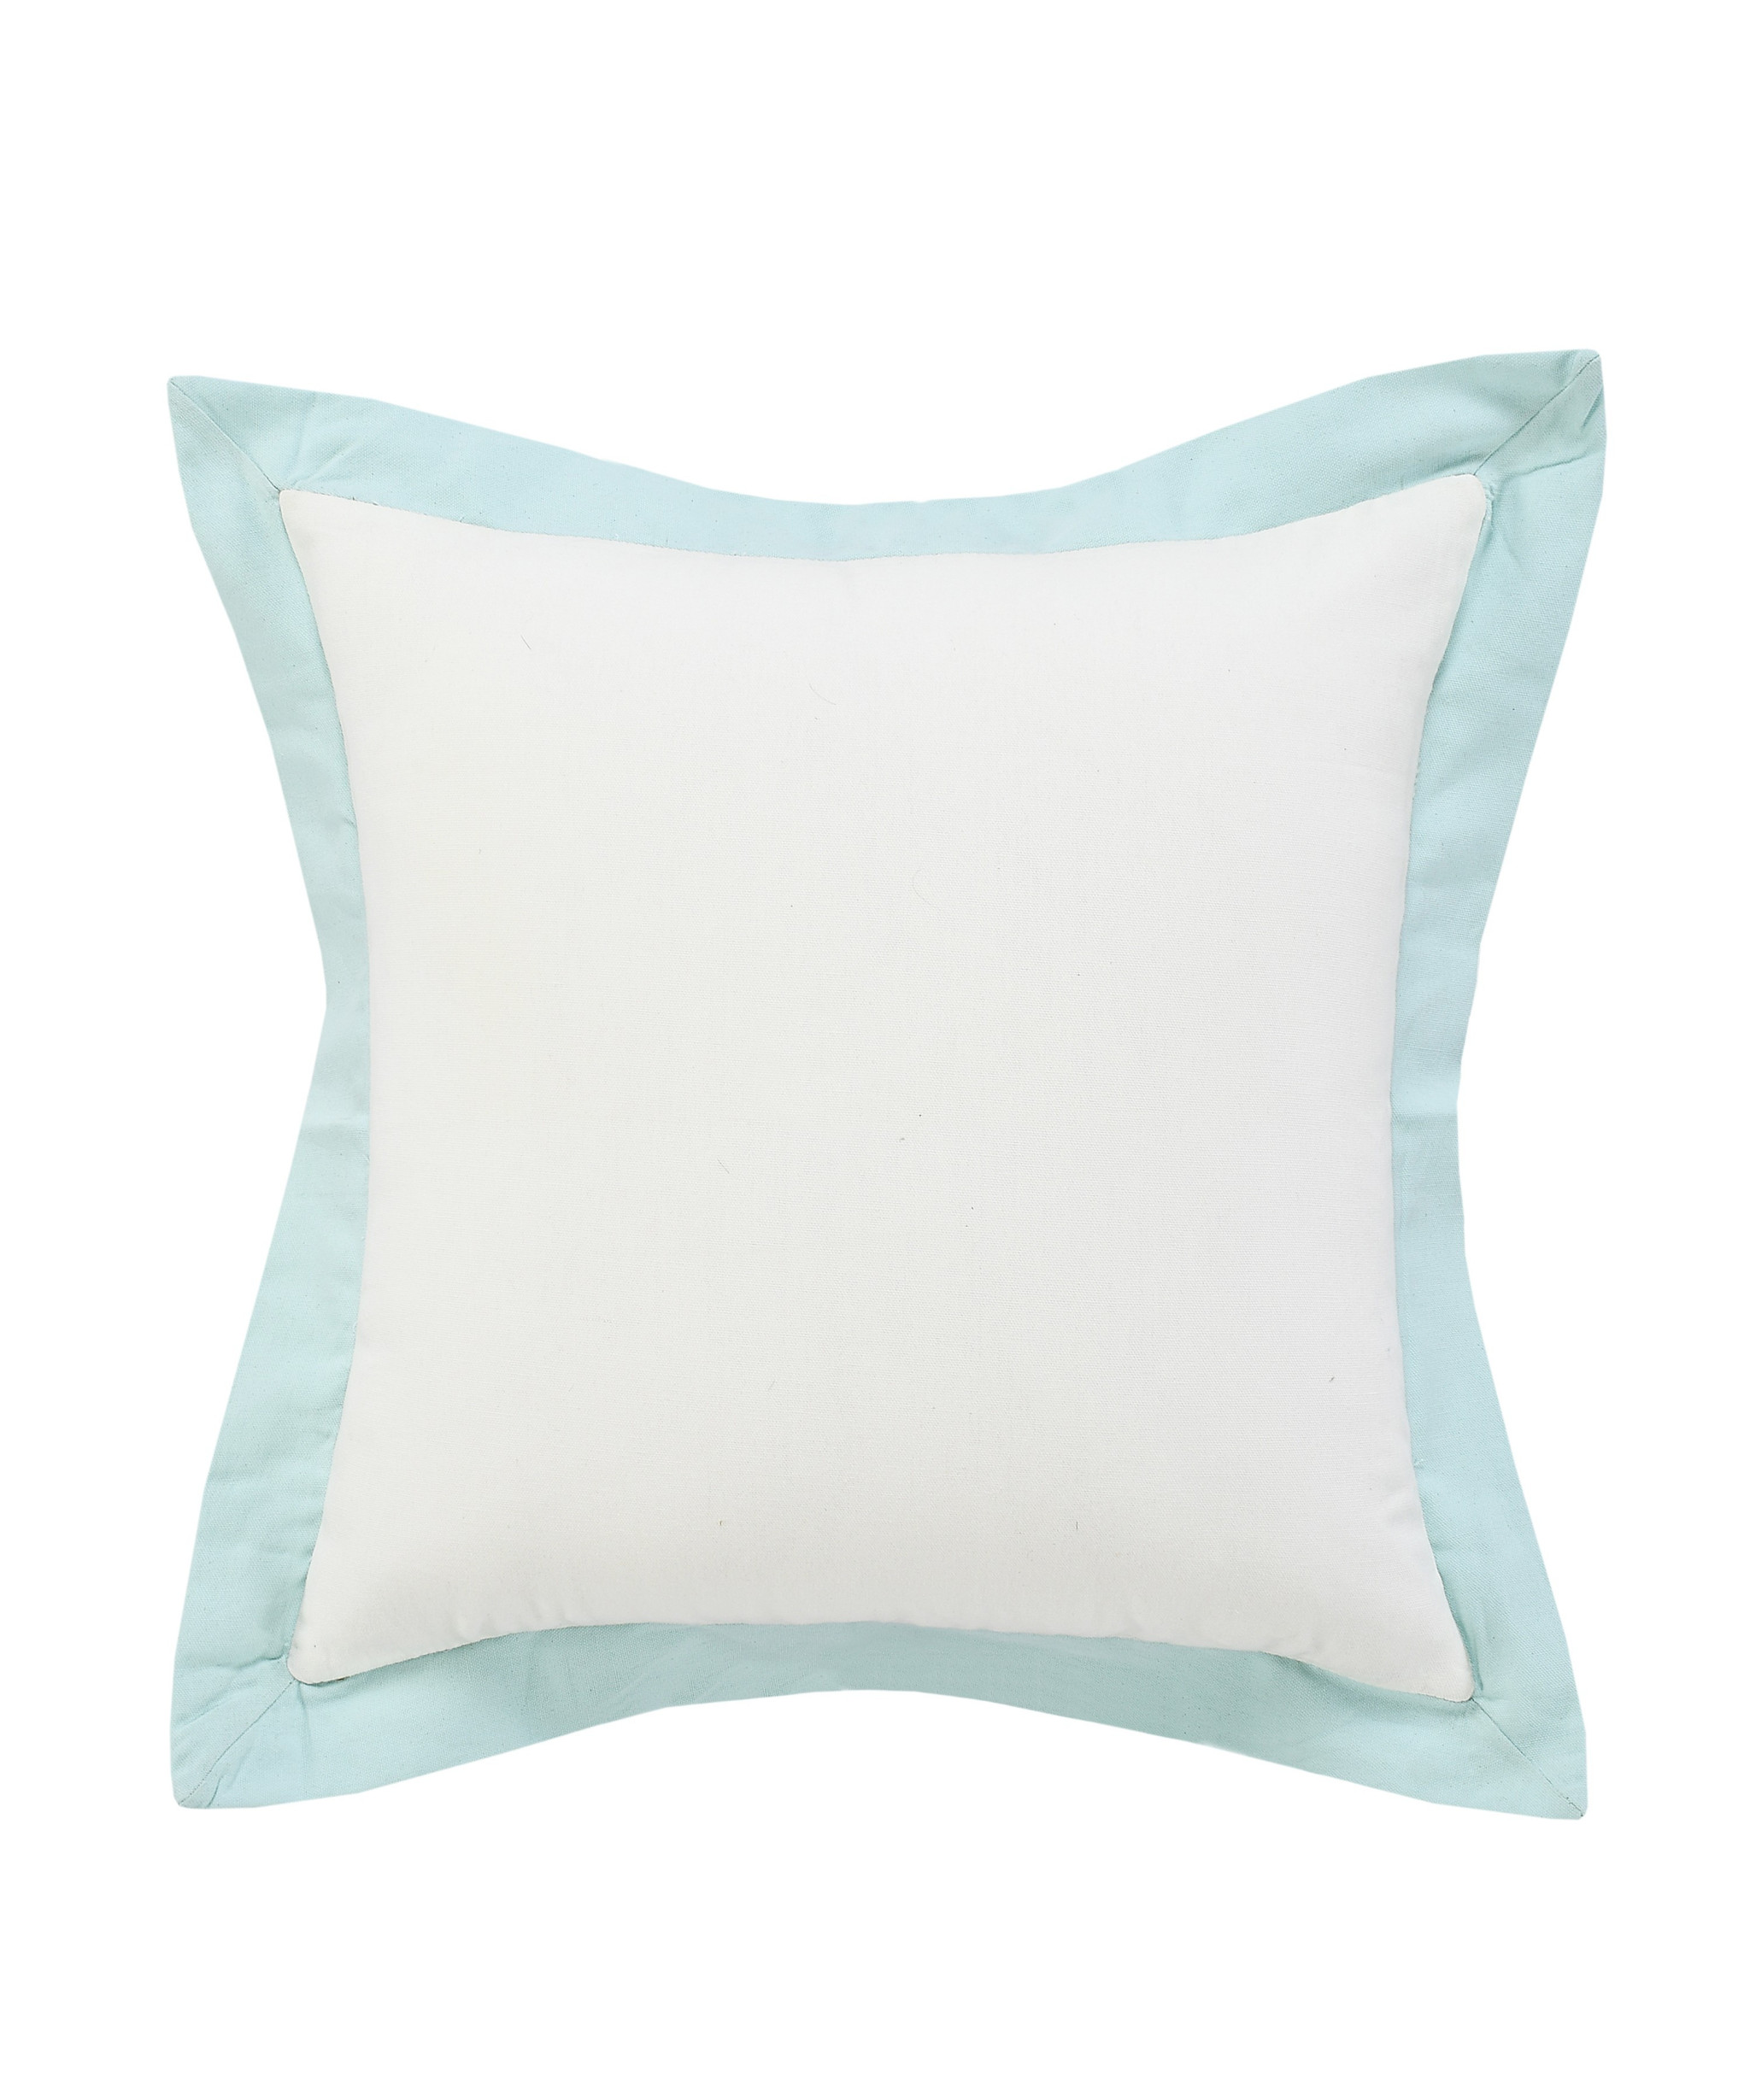 20" X 20" White And Icy Blue 100% Cotton Geometric Zippered Pillow-516831-1